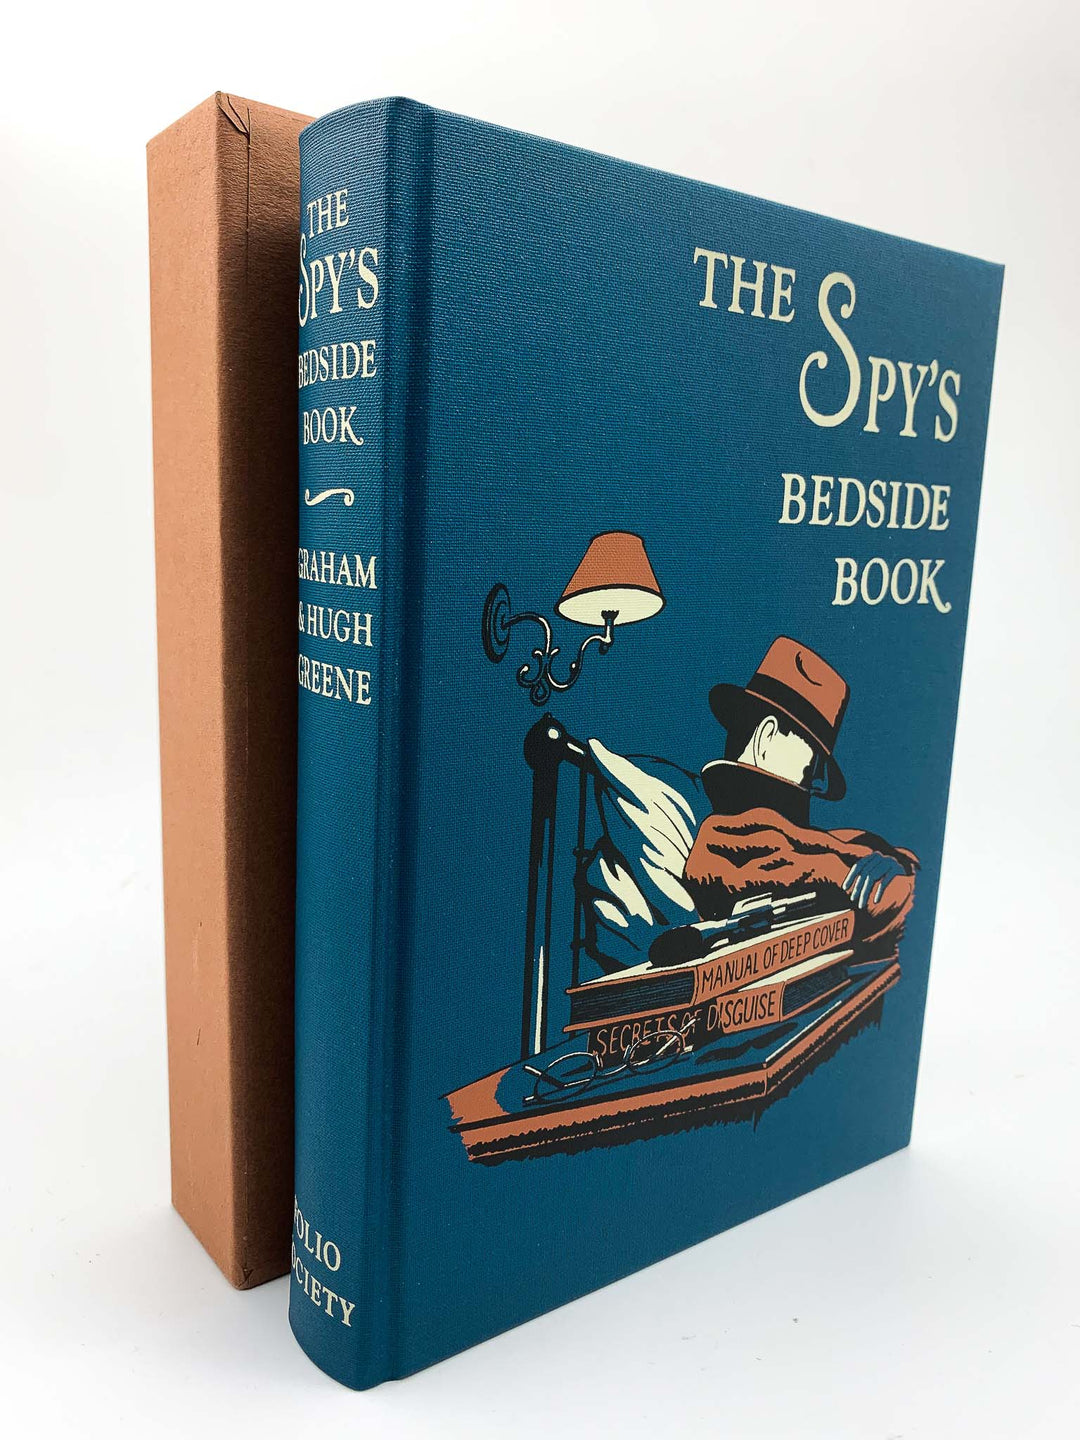 Greene, Graham - The Spy's Bedside Book | front cover